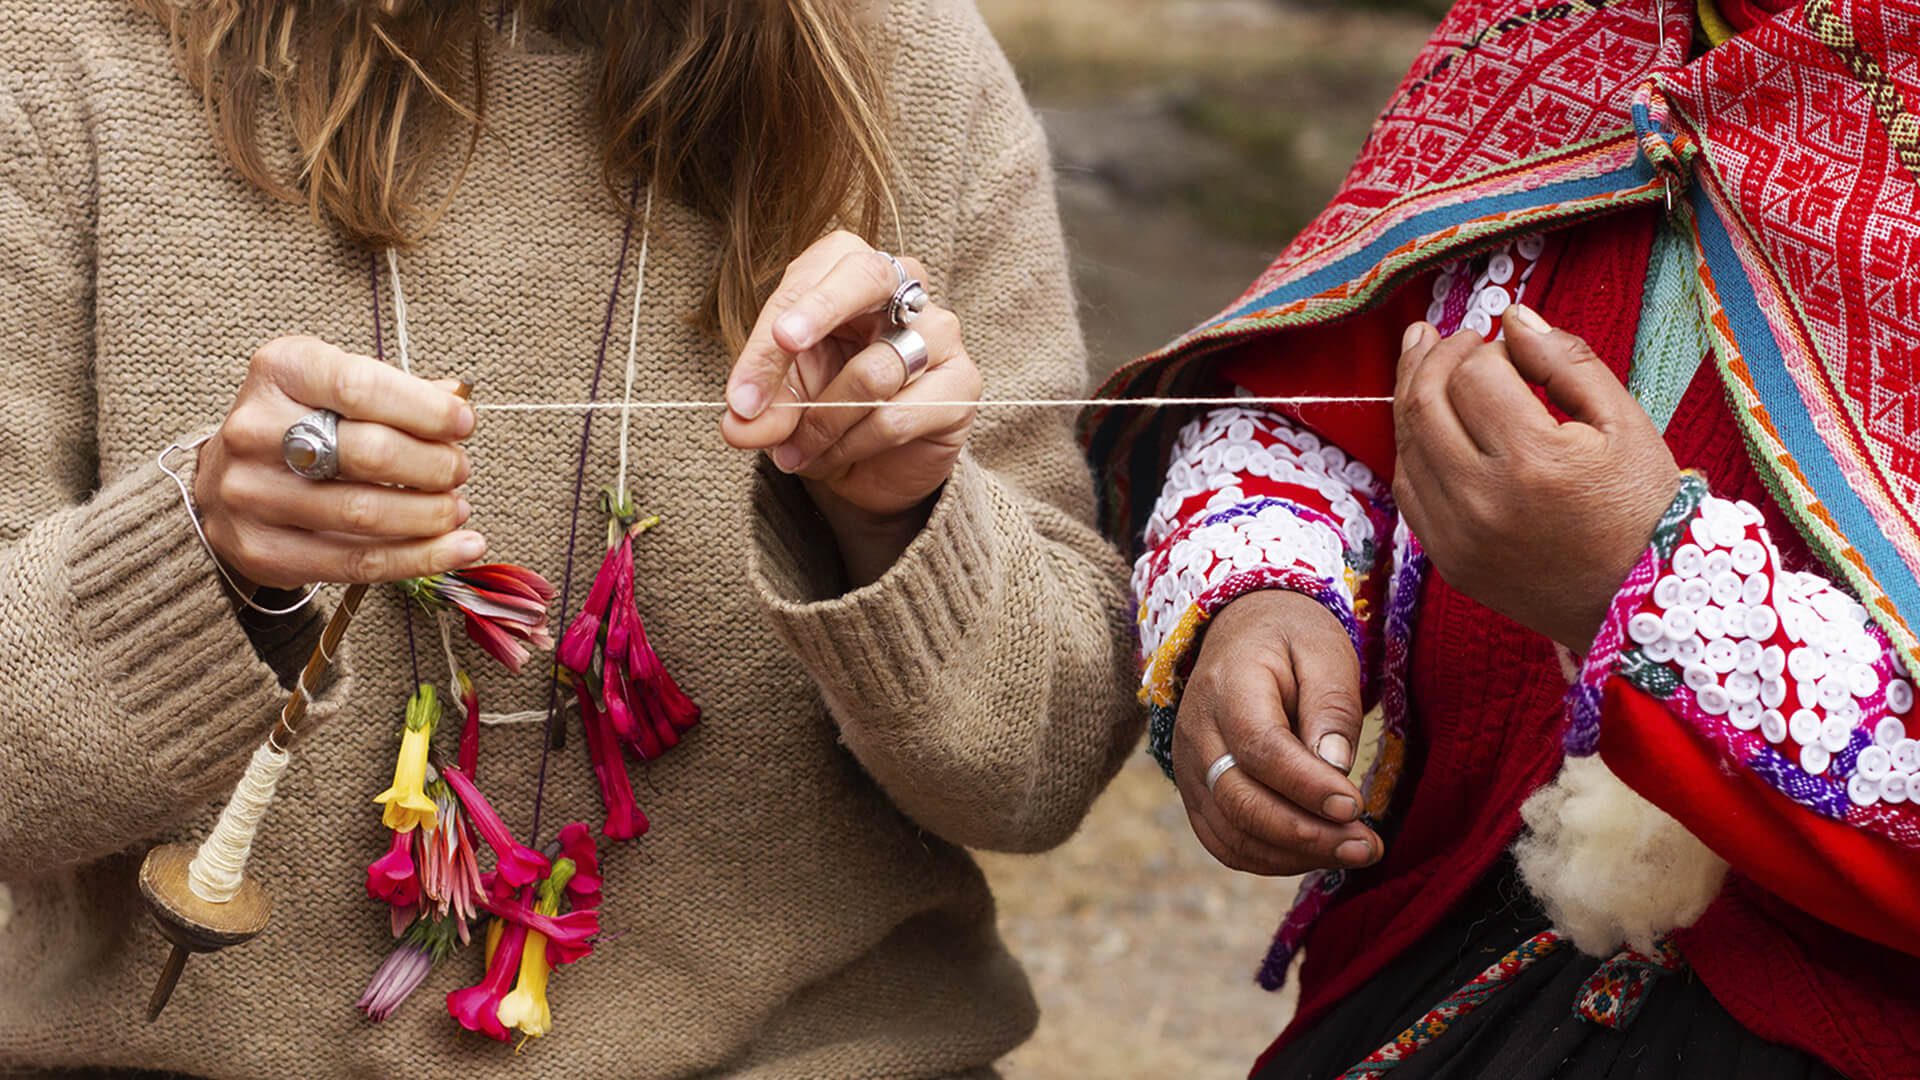 Like other indigenous communities in Peru, the villagers realized that their skills are an asset that needs to be displayed to keep them alive.